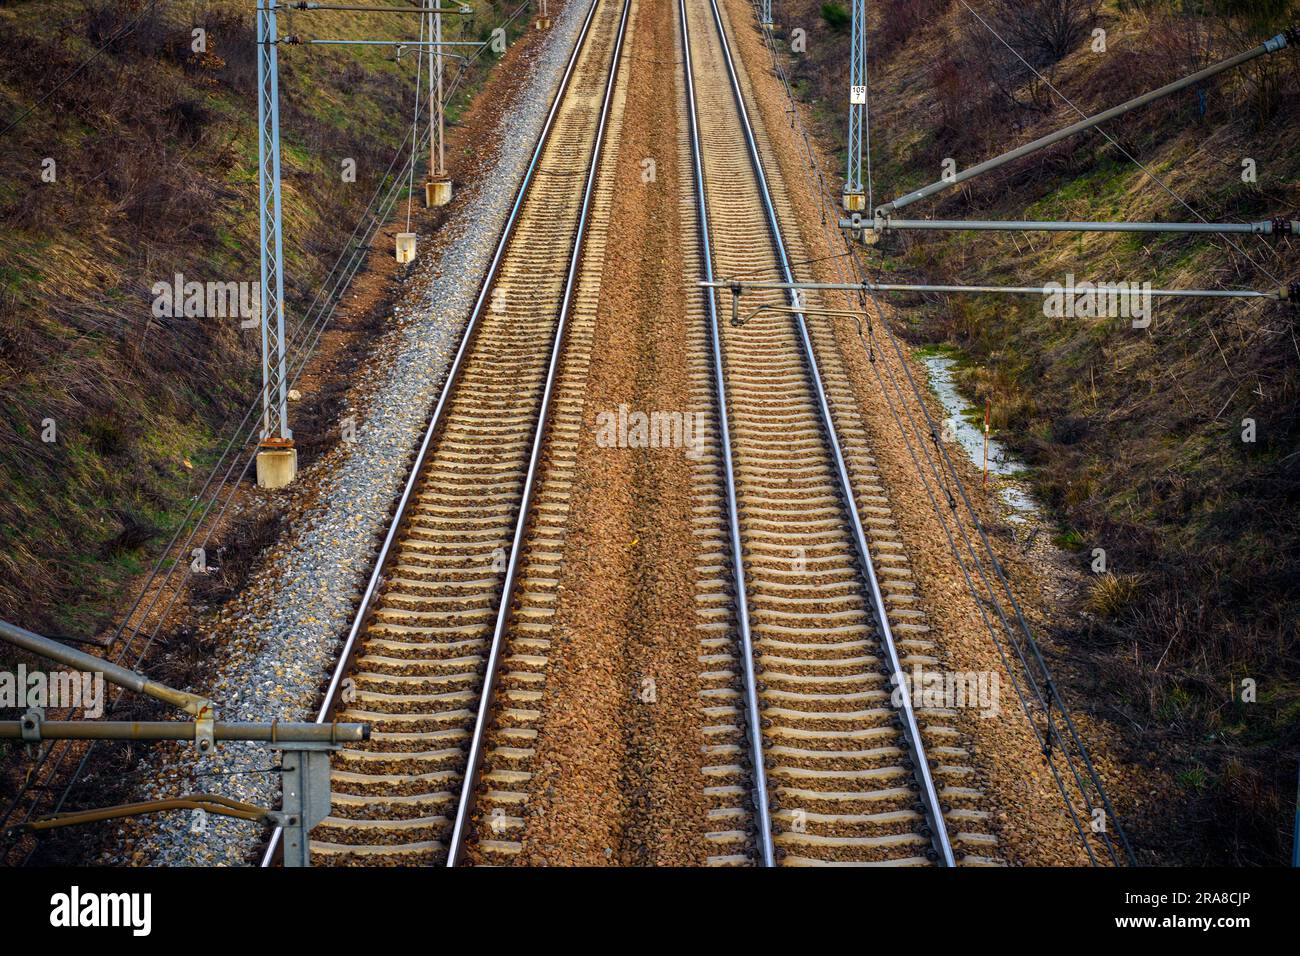 Railway tracks in the Eagle's Nests Landscape Park in early spring, Silesian Voivodeship, Poland. Stock Photo